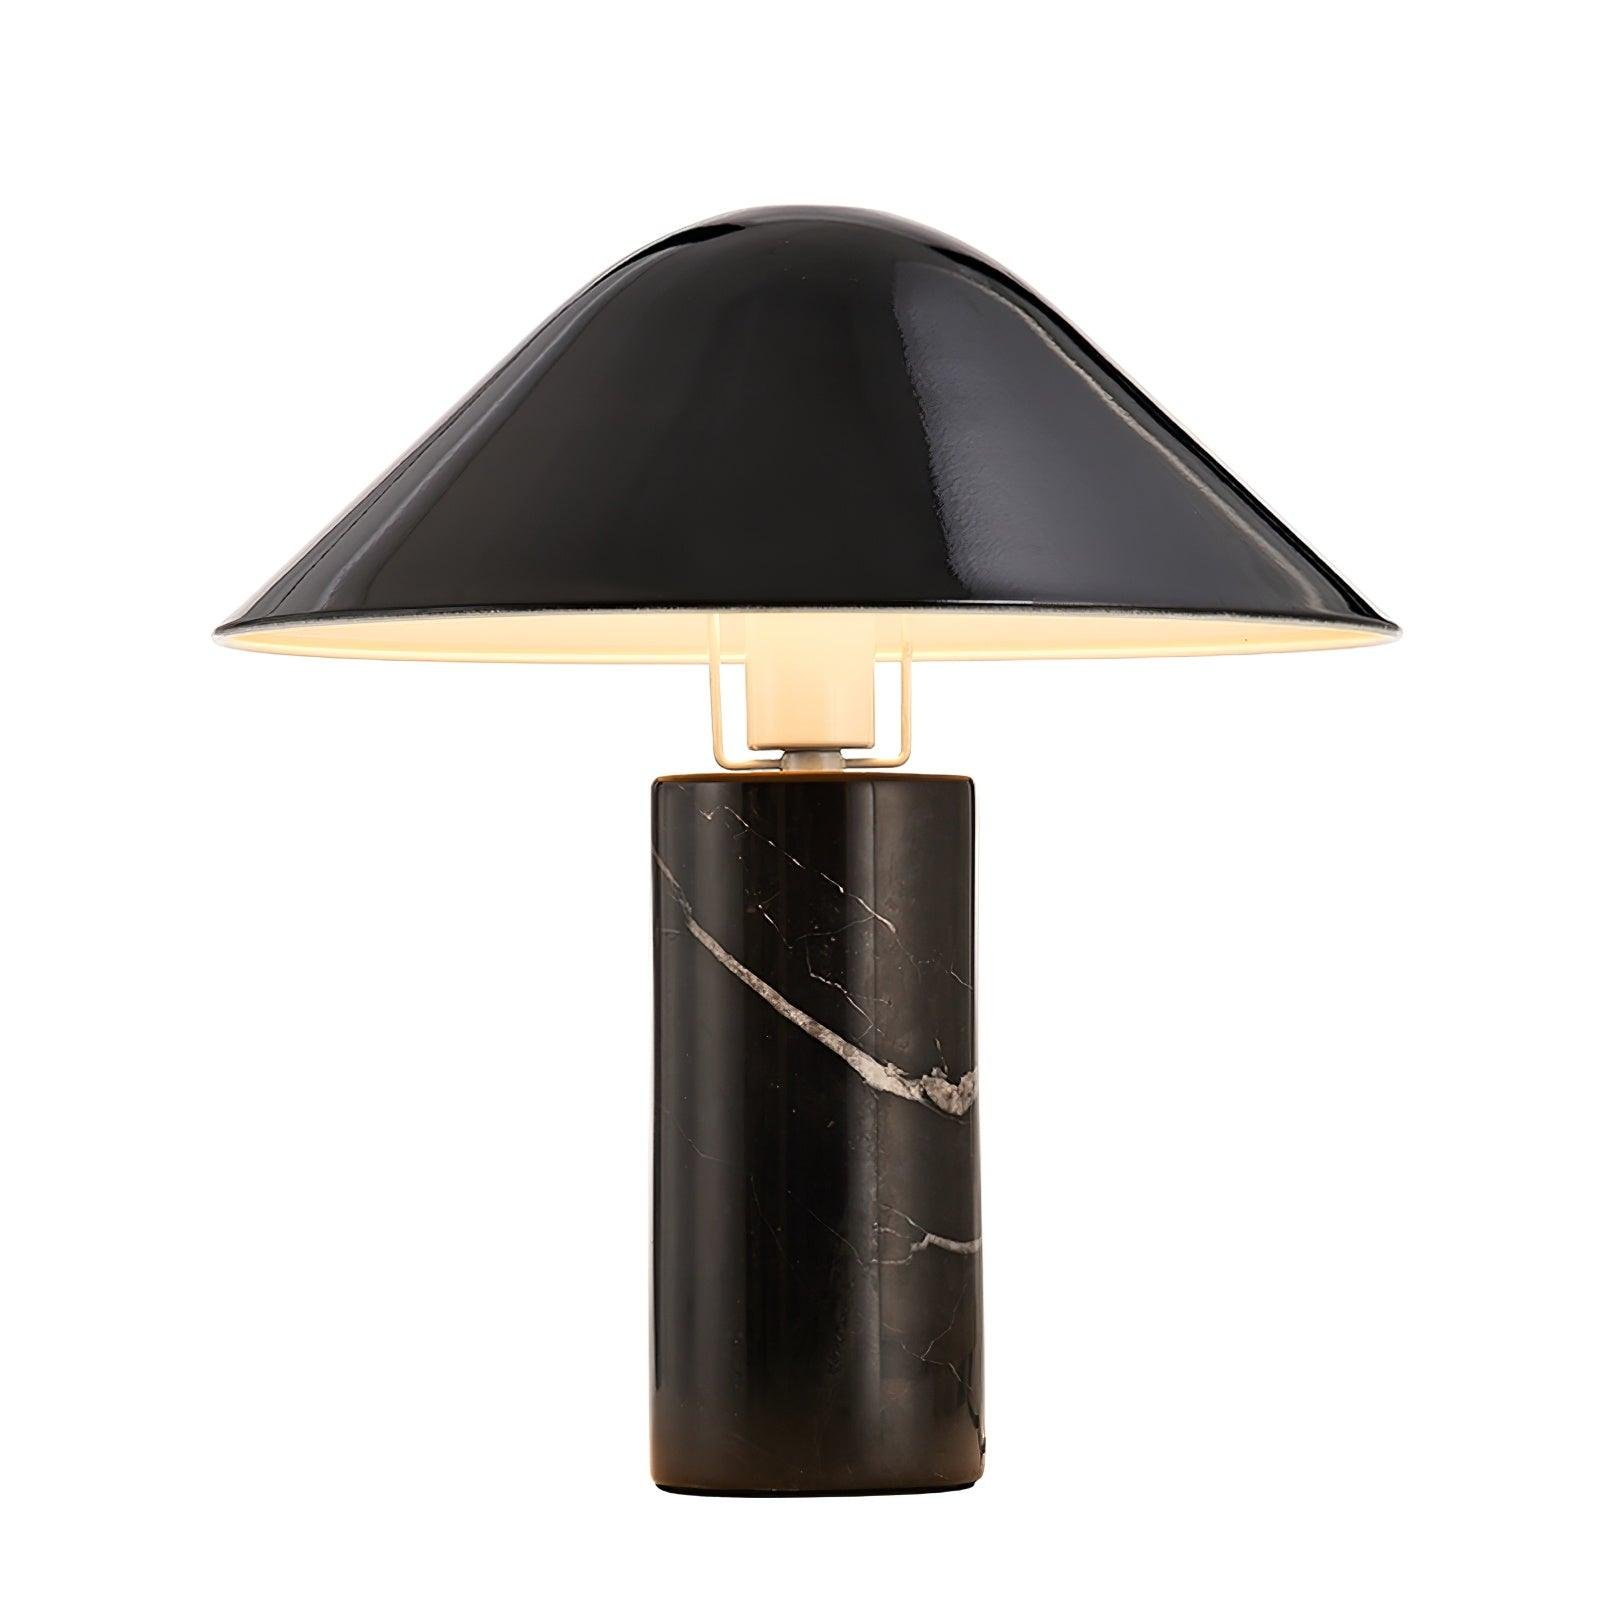 Adelaide Marble Table Lamp - Diameter: 14.9 inches, Height: 16.5 inches (38cm x 42cm), Color: Black, Includes UK Plug